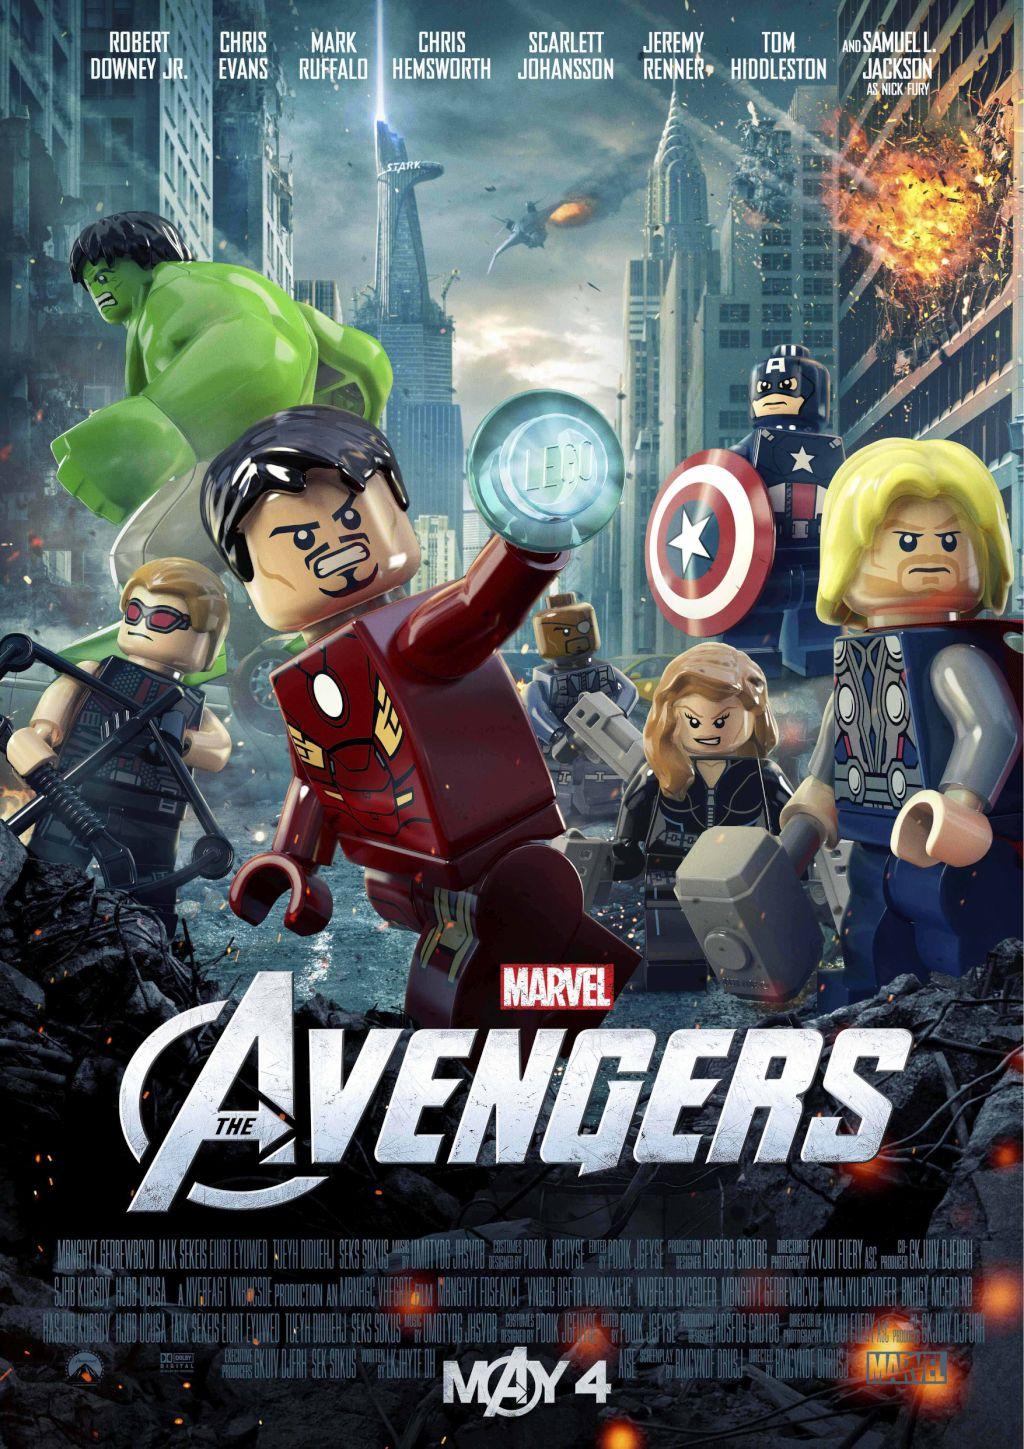 The Avengers Lego Edition Movie Poster Wallpaper Image for iPad mini 3